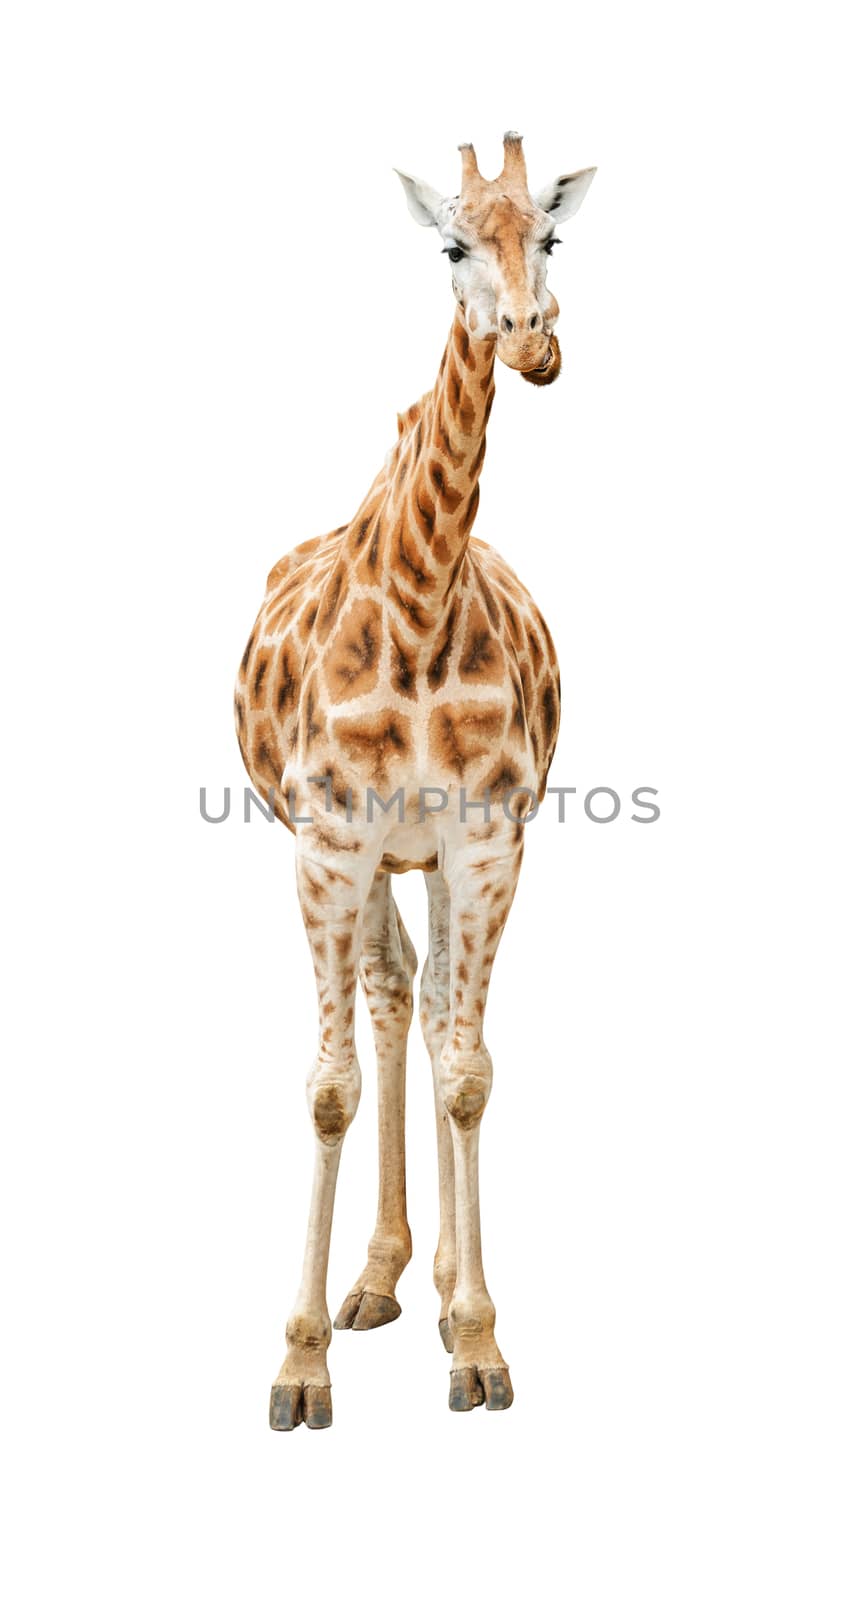 Giraffe looking front view isolated on white background